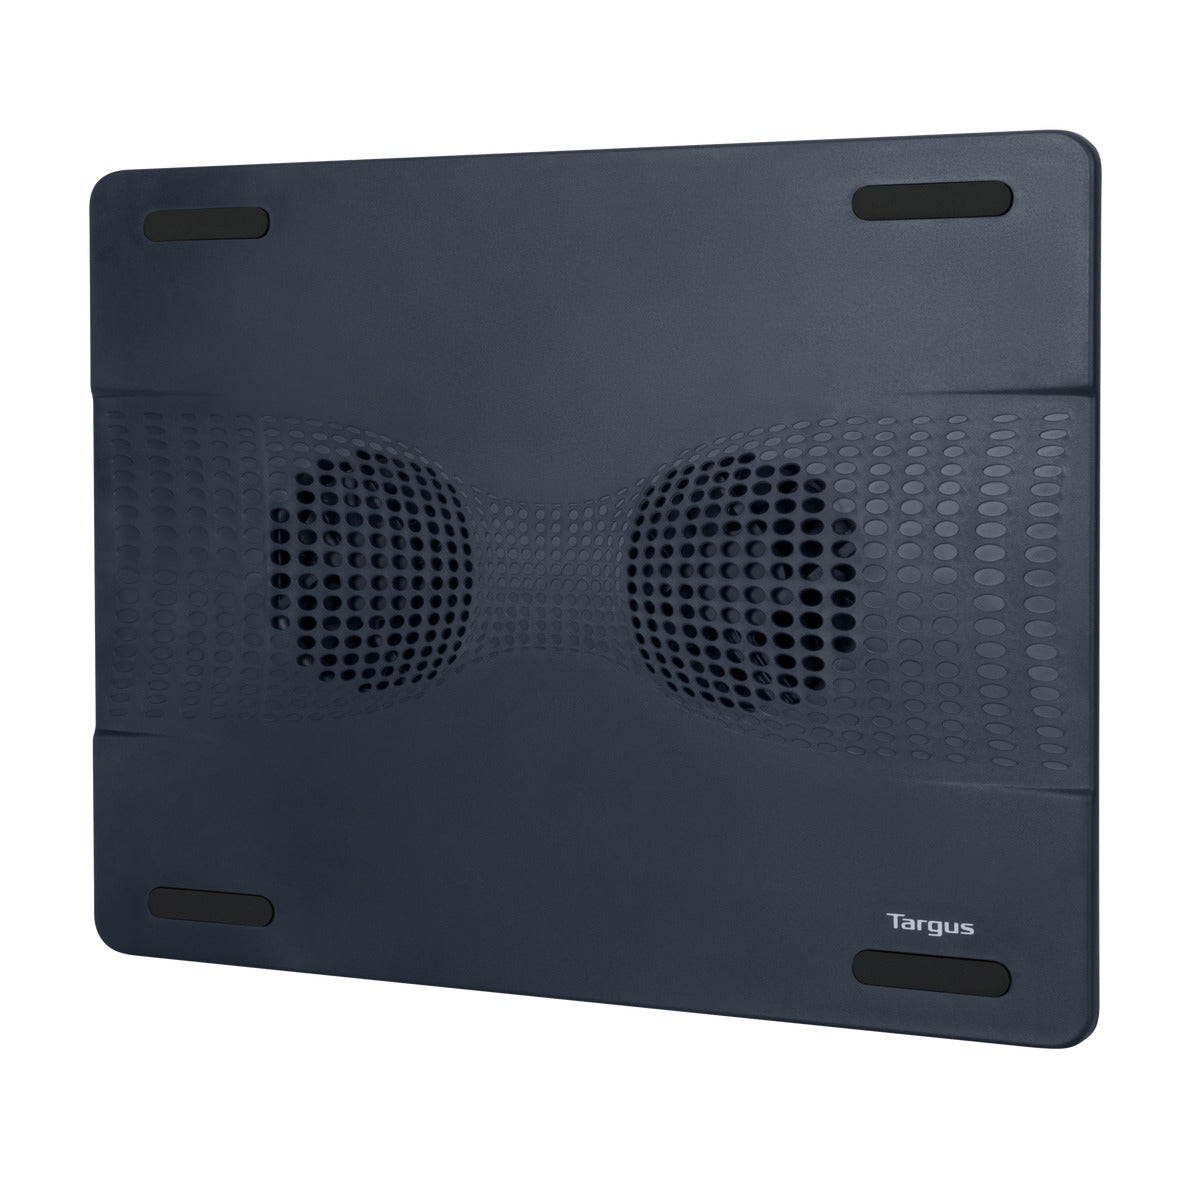 Laptop Cooling Pads and Chill Mats, Laptop Cooling Fans